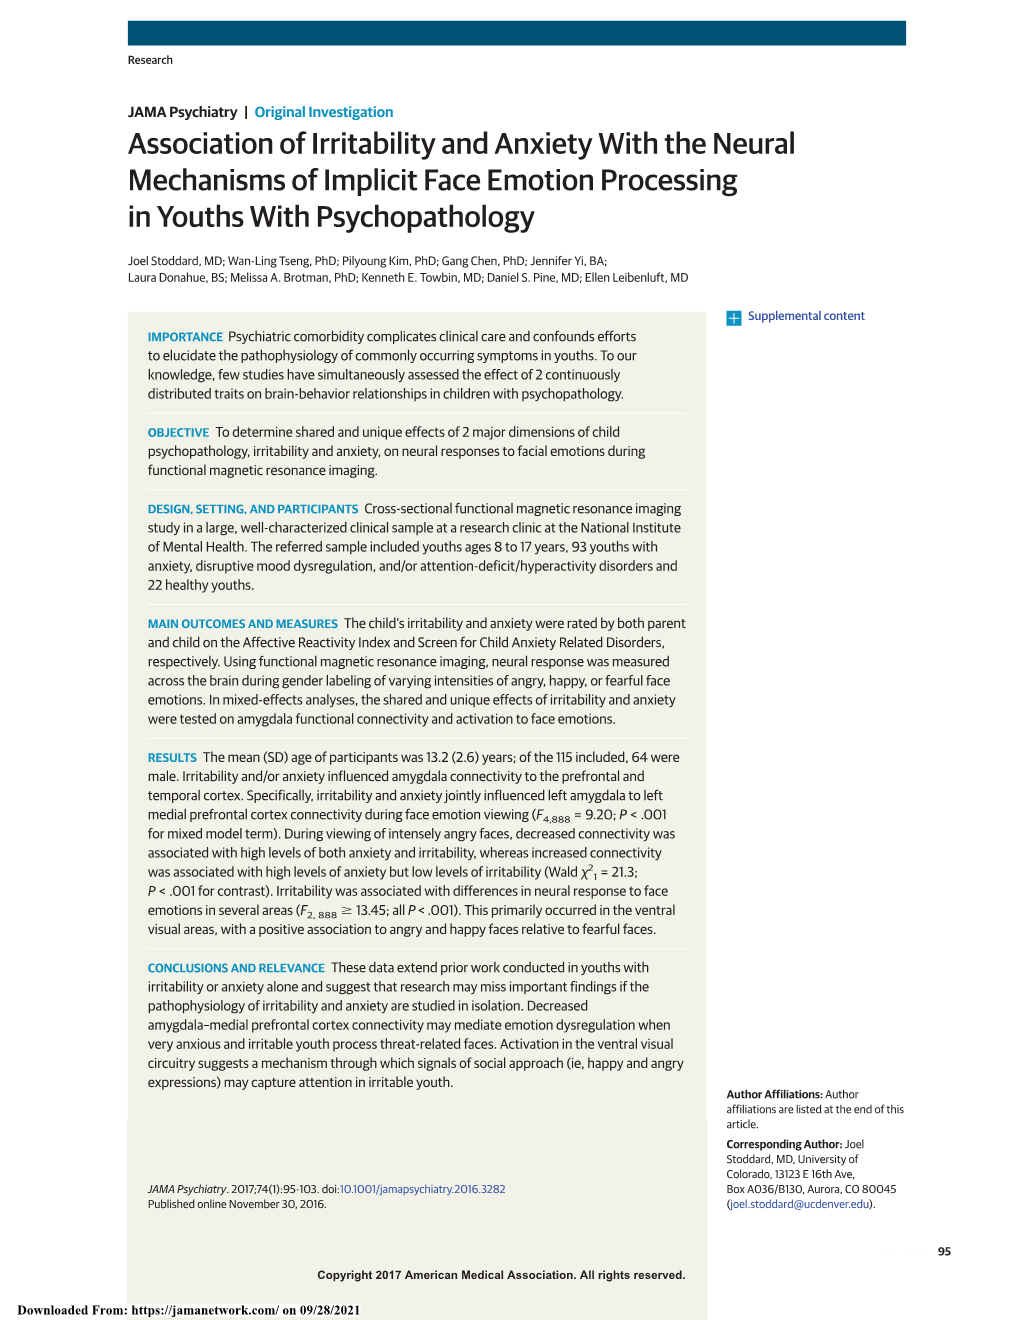 Association of Irritability and Anxiety with the Neural Mechanisms of Implicit Face Emotion Processing in Youths with Psychopathology